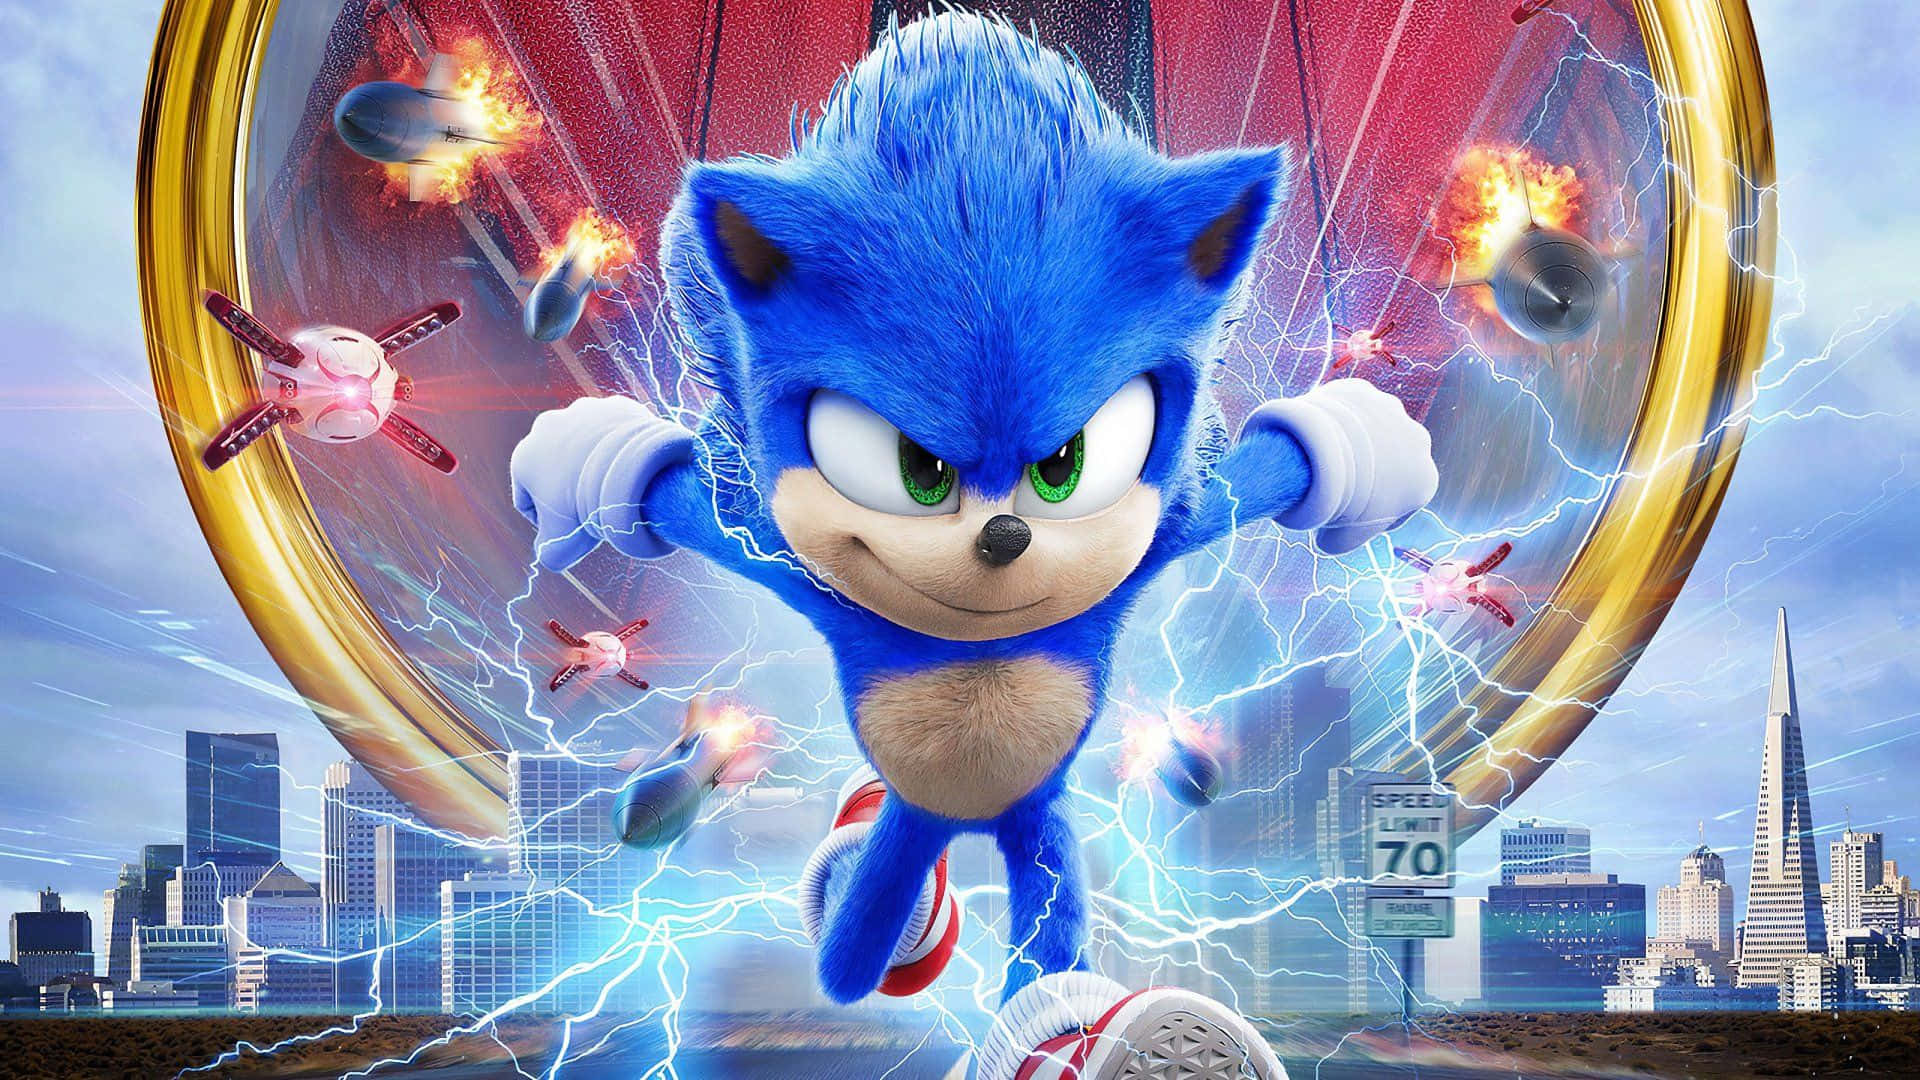 Sonic The Hedgehog Movie Poster